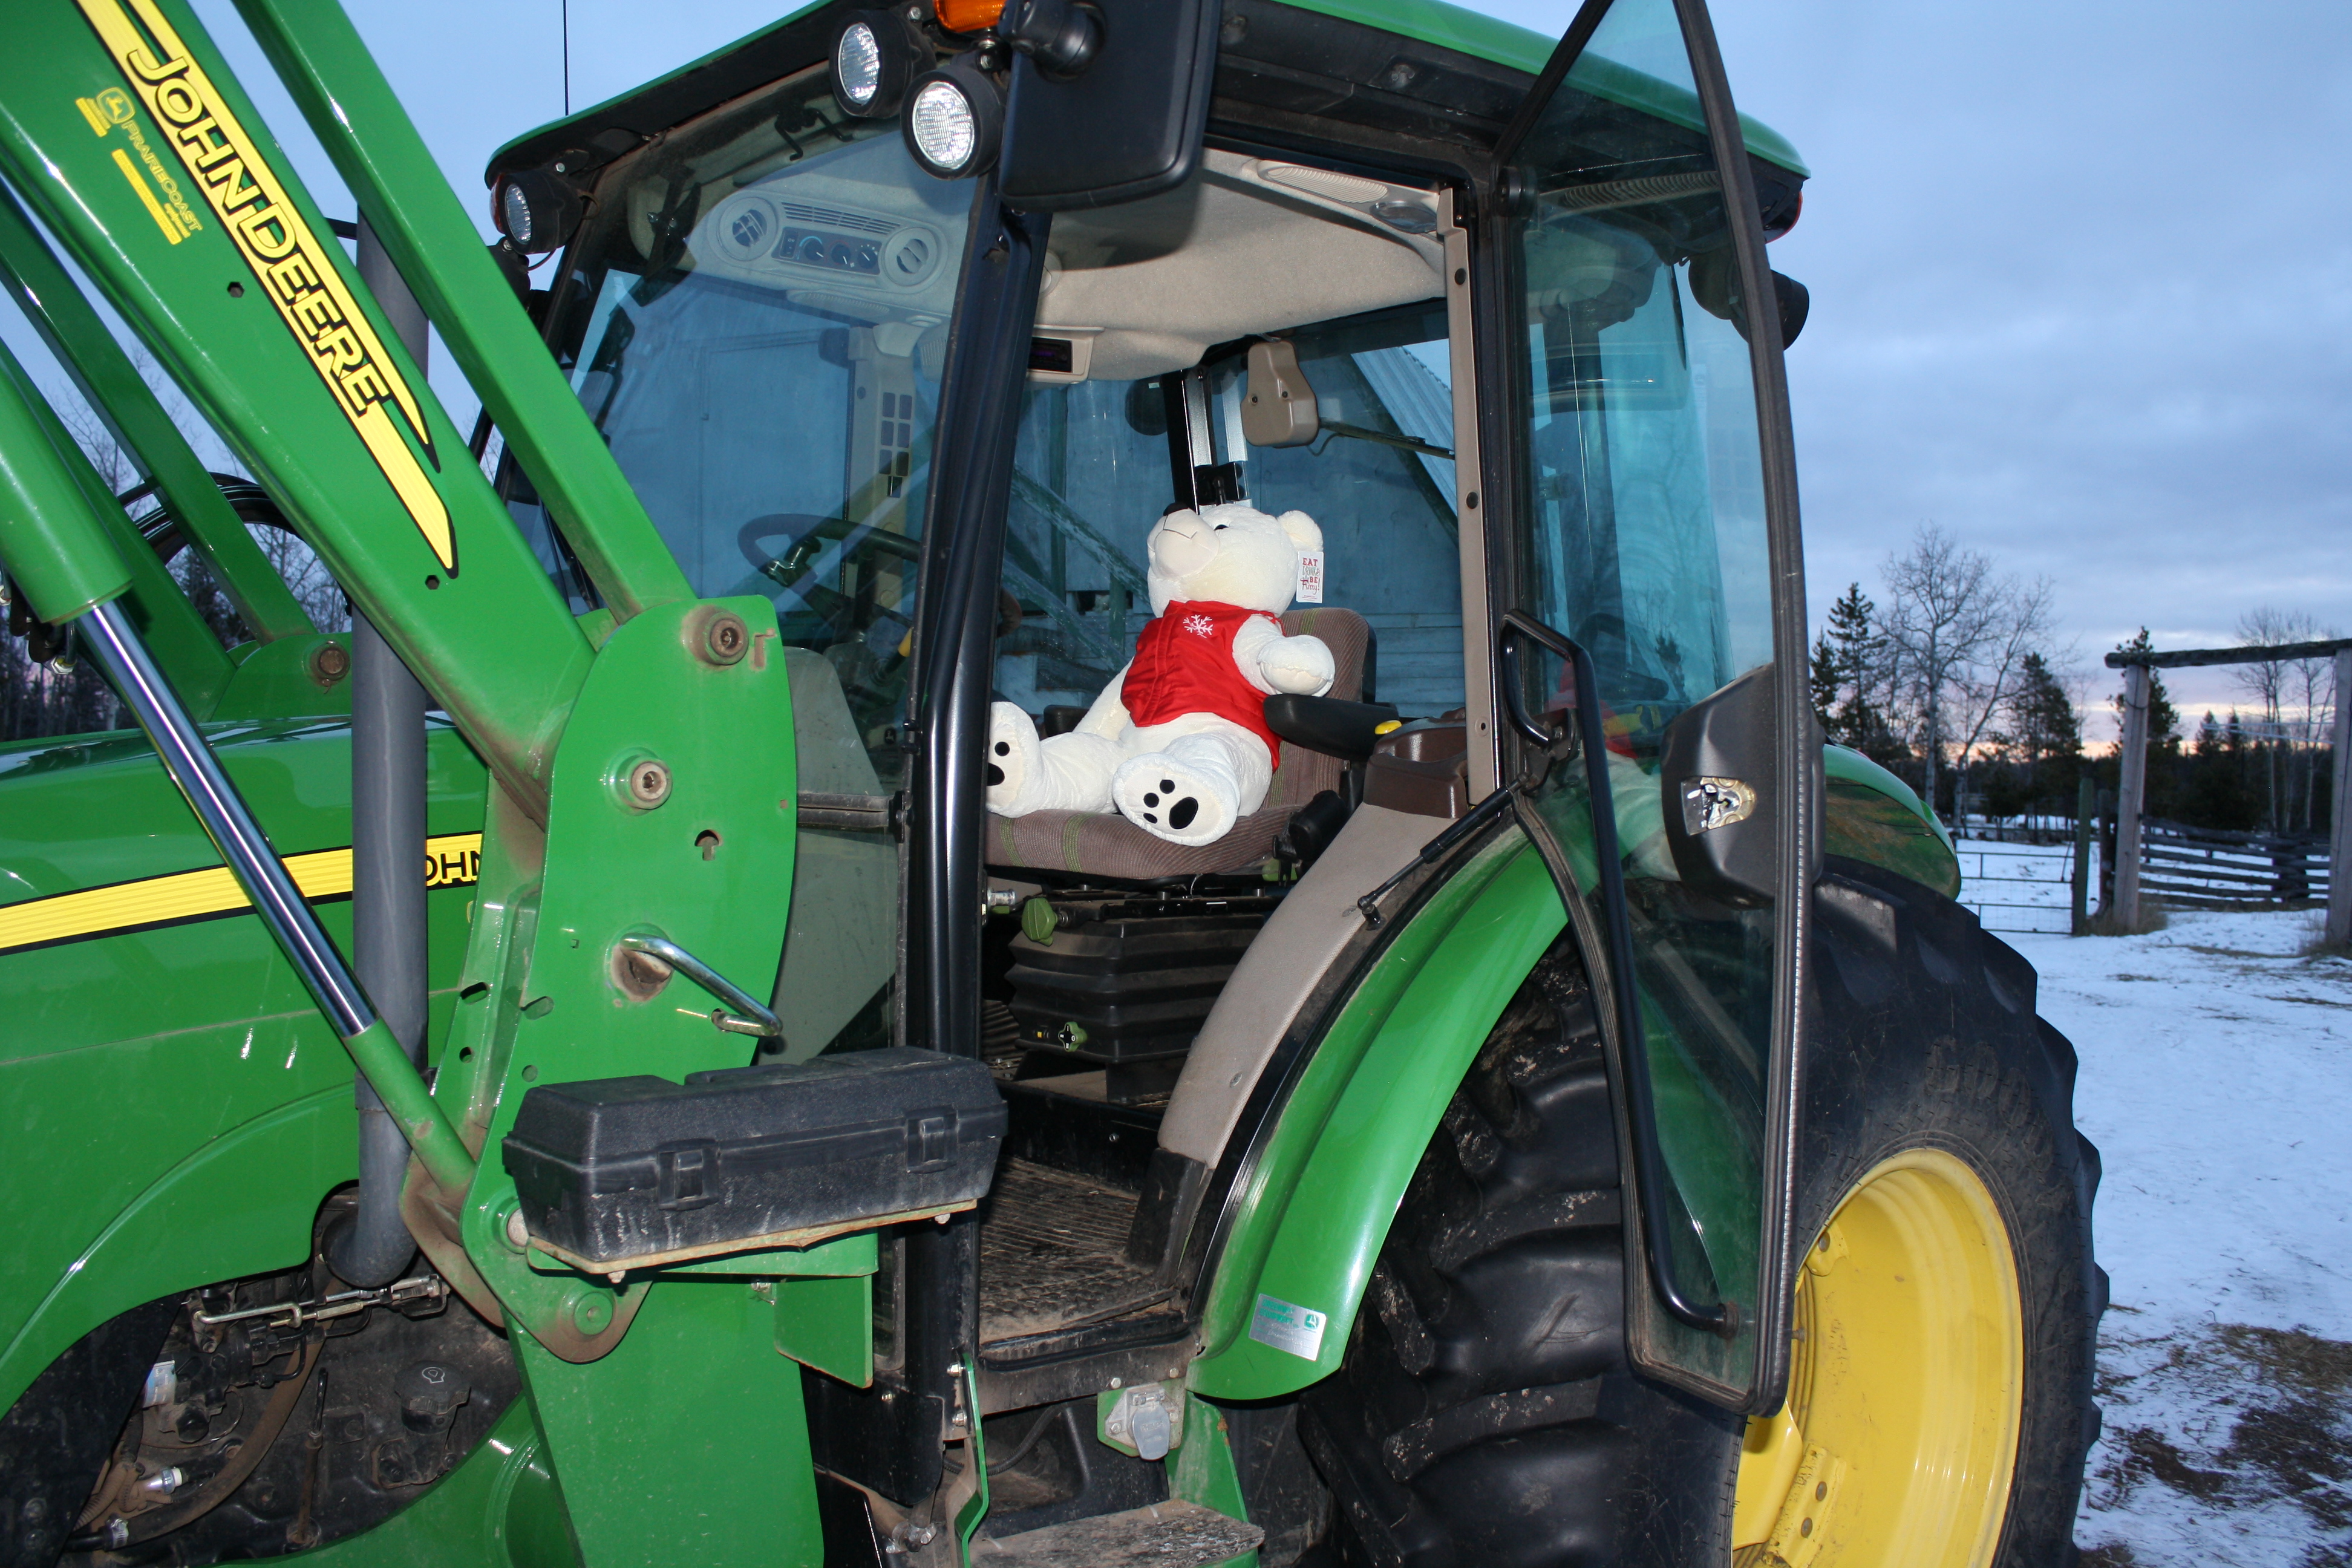 Somebody wants to drive one of our tractors!